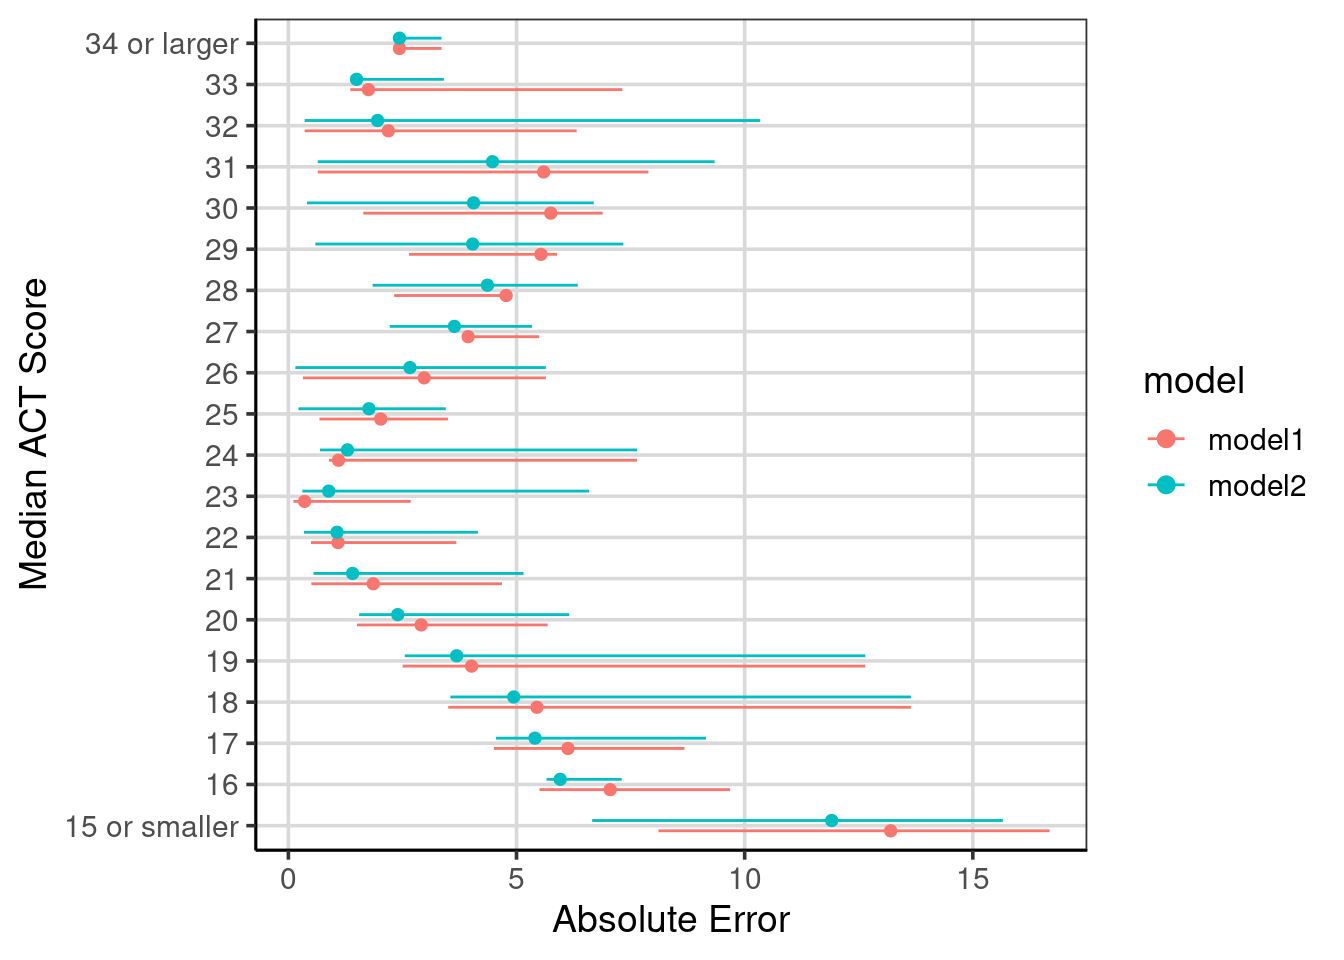 Compared absolute error across the two regression tree models fitted.